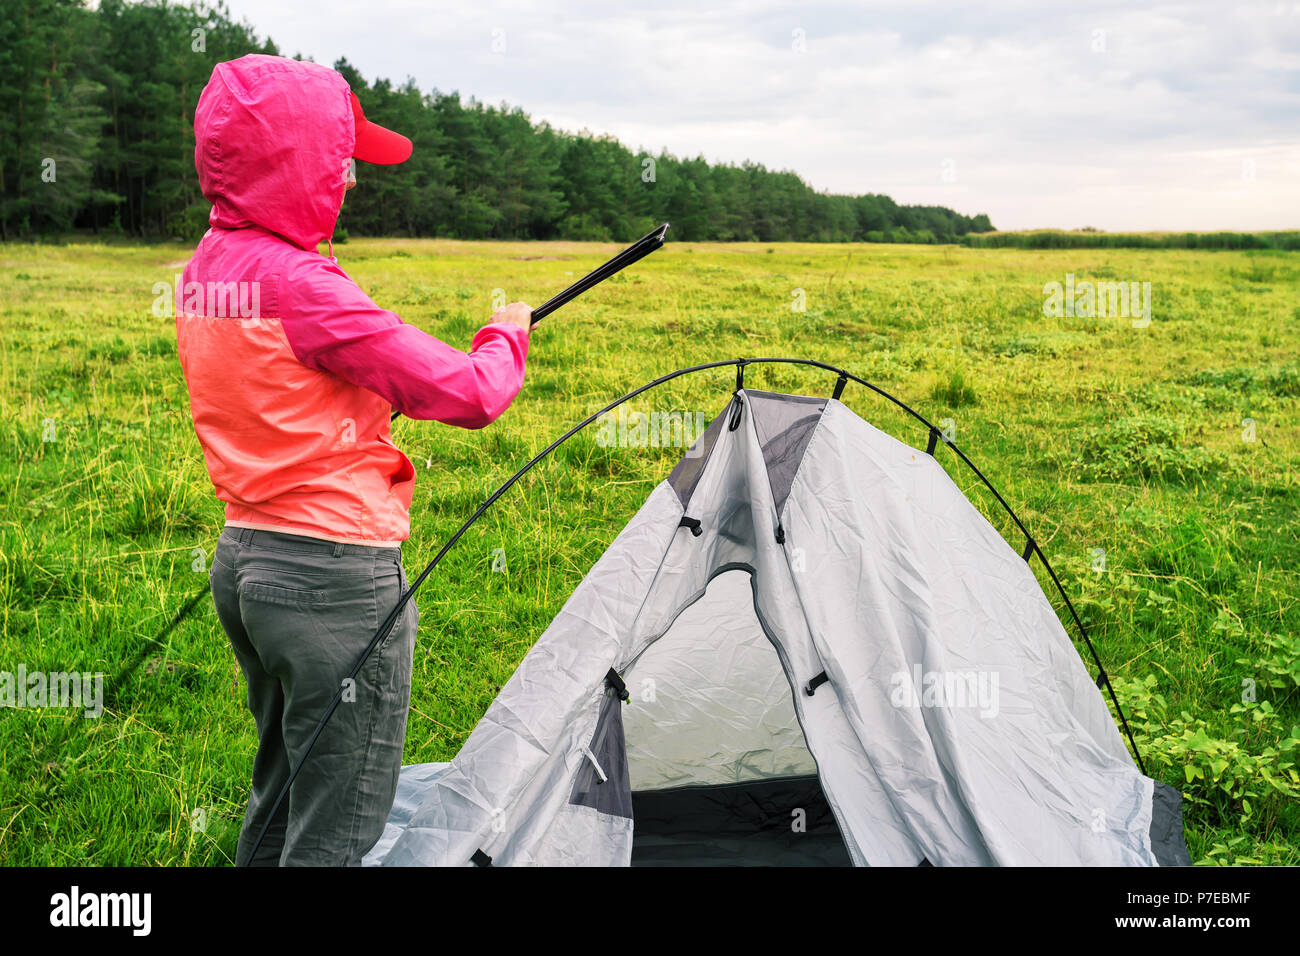 Girl in a pink jacket with a hood sets up a tent Stock Photo